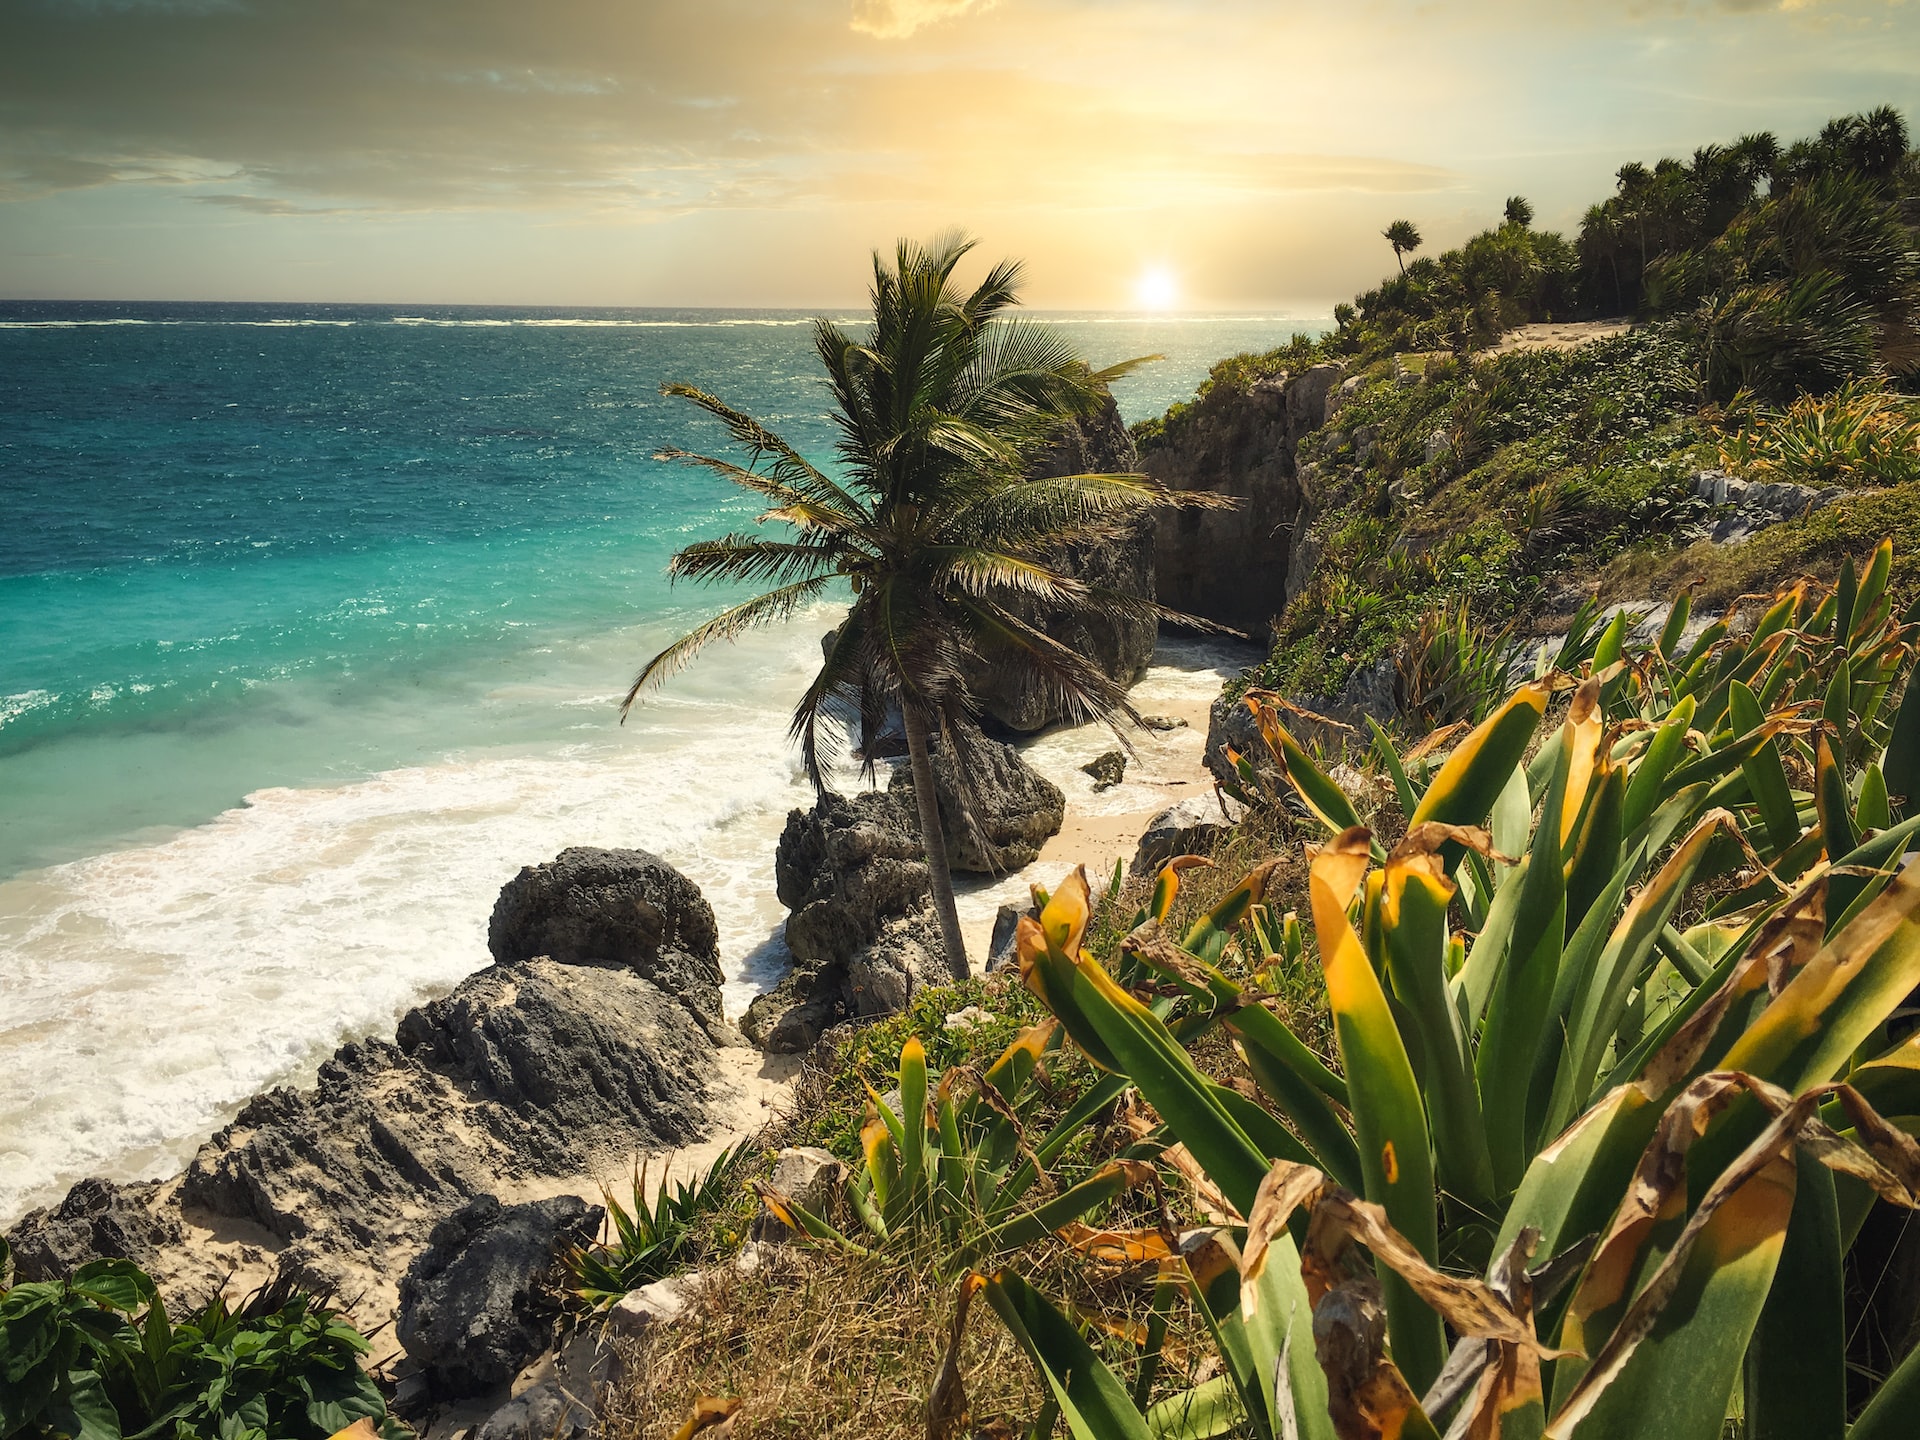 What to do in Tulum?